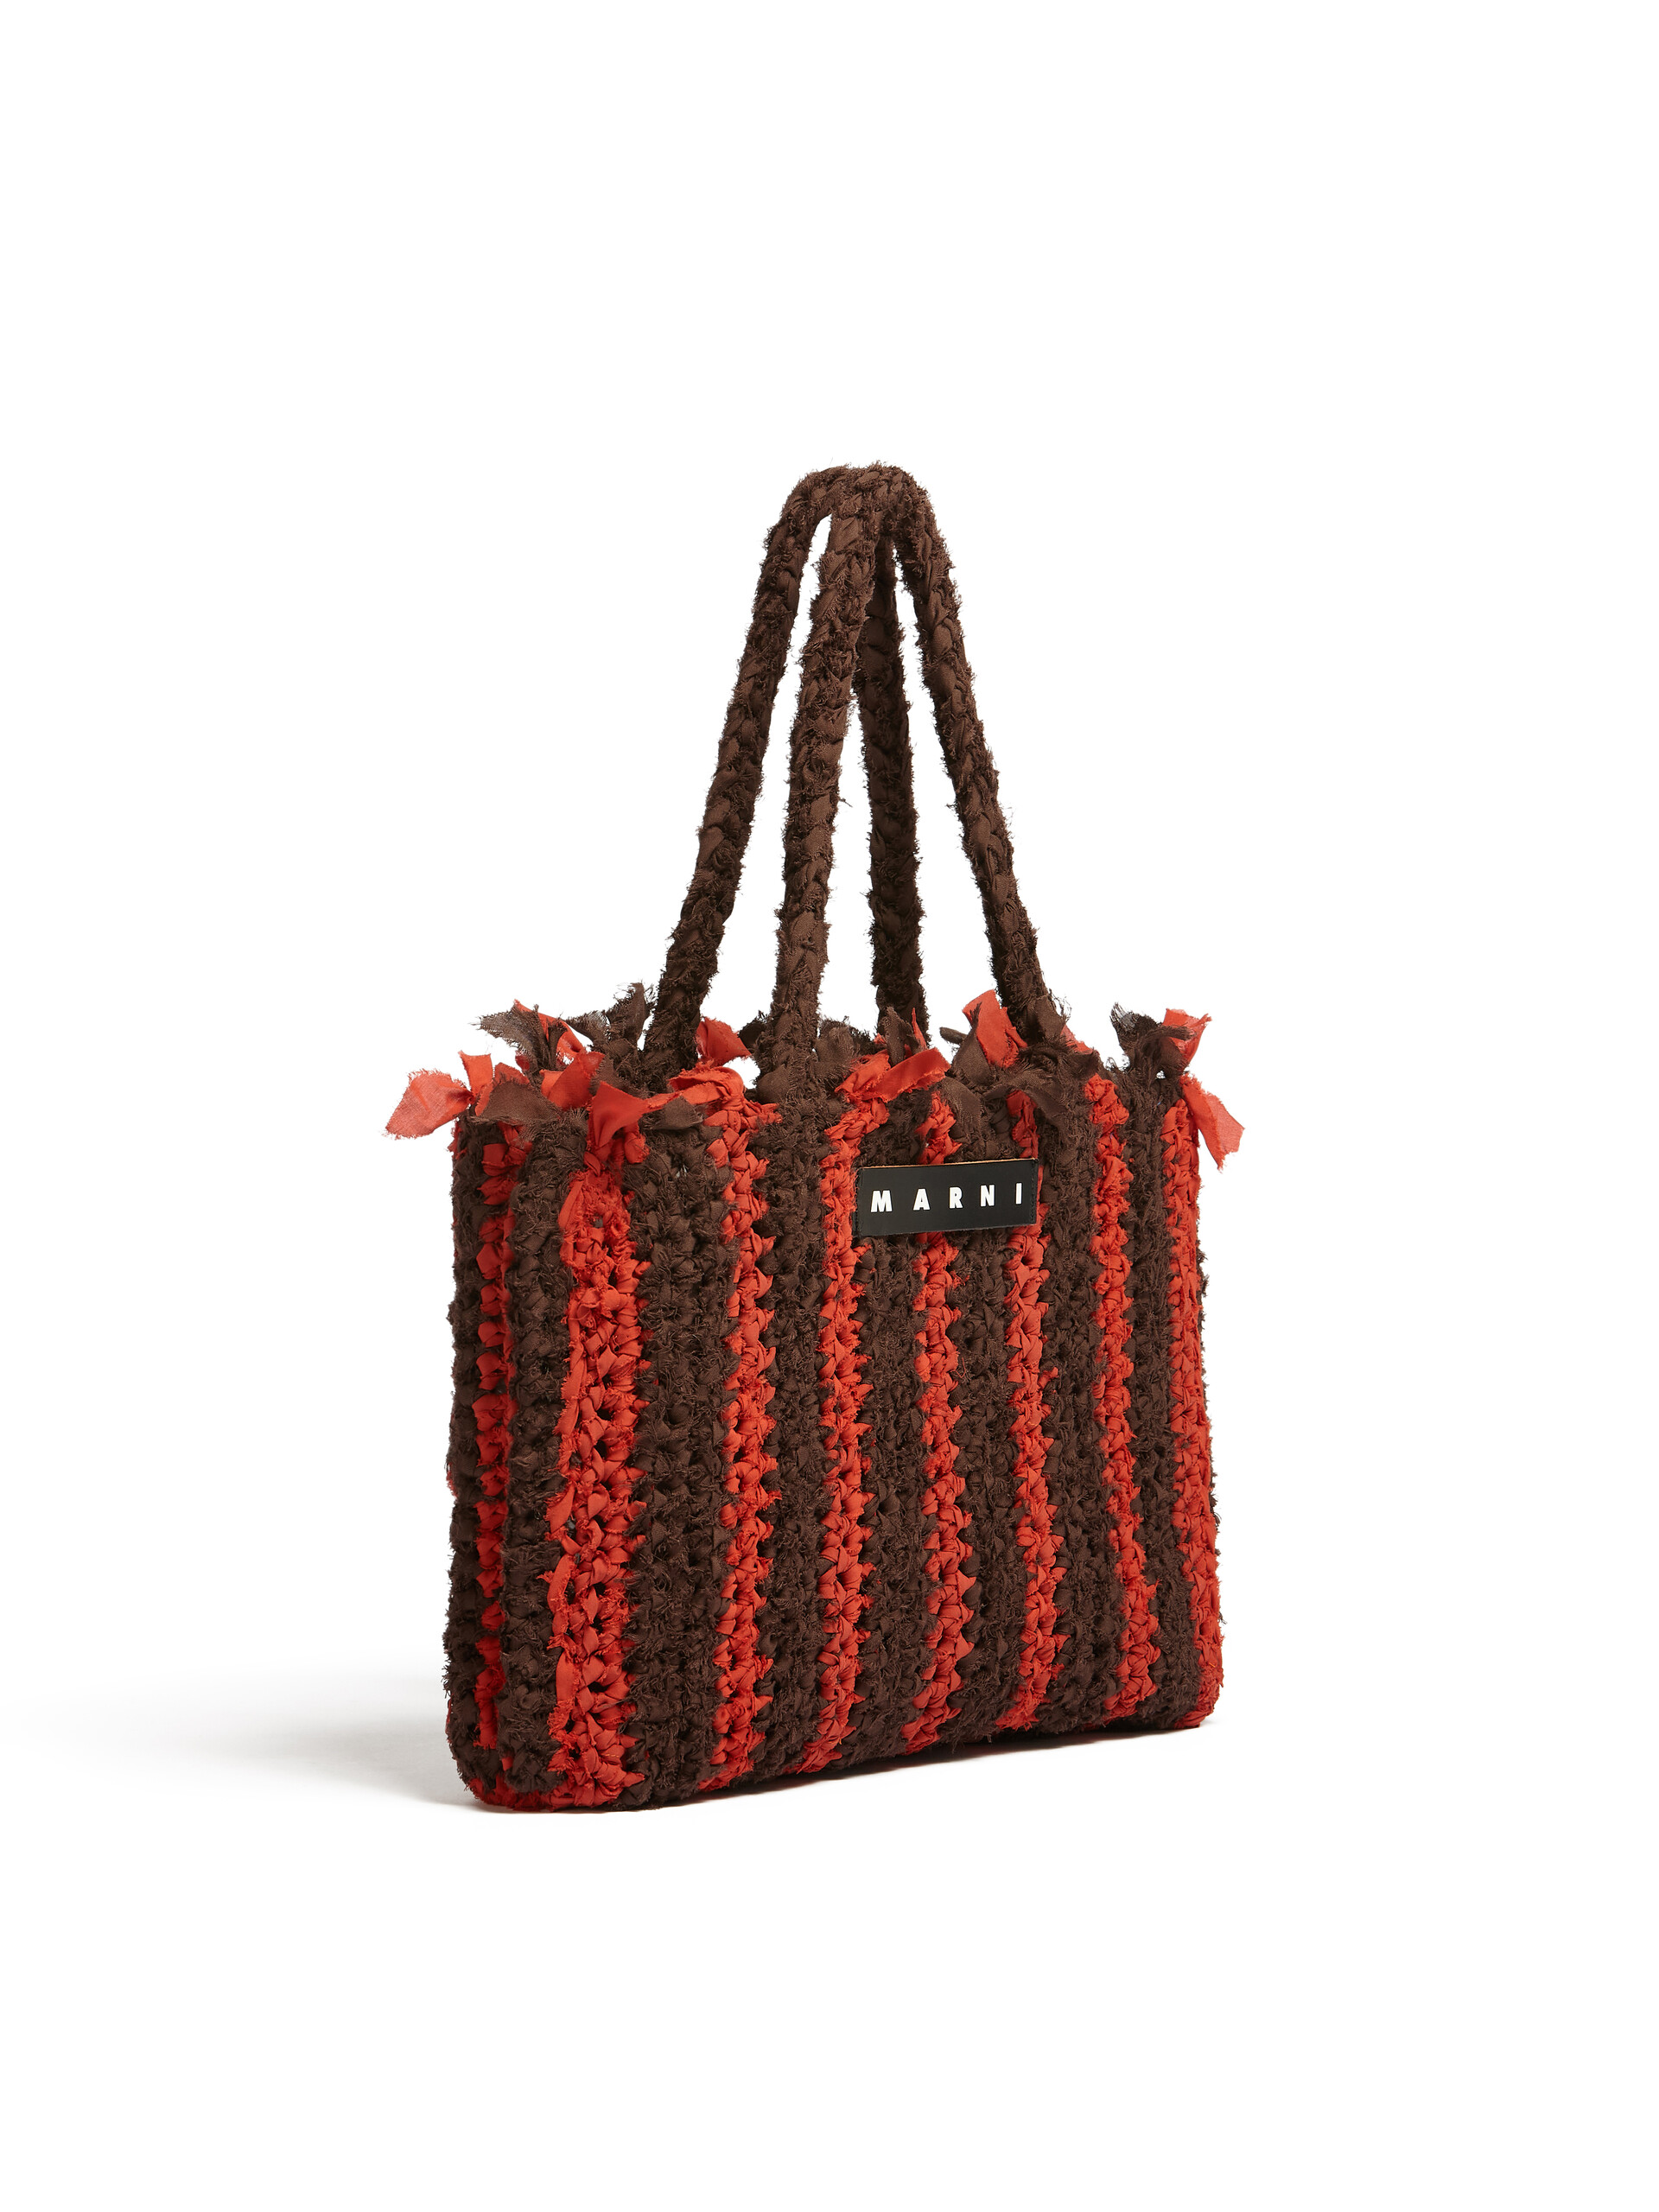 Brown and red cotton MARNI MARKET bag - Bags - Image 2